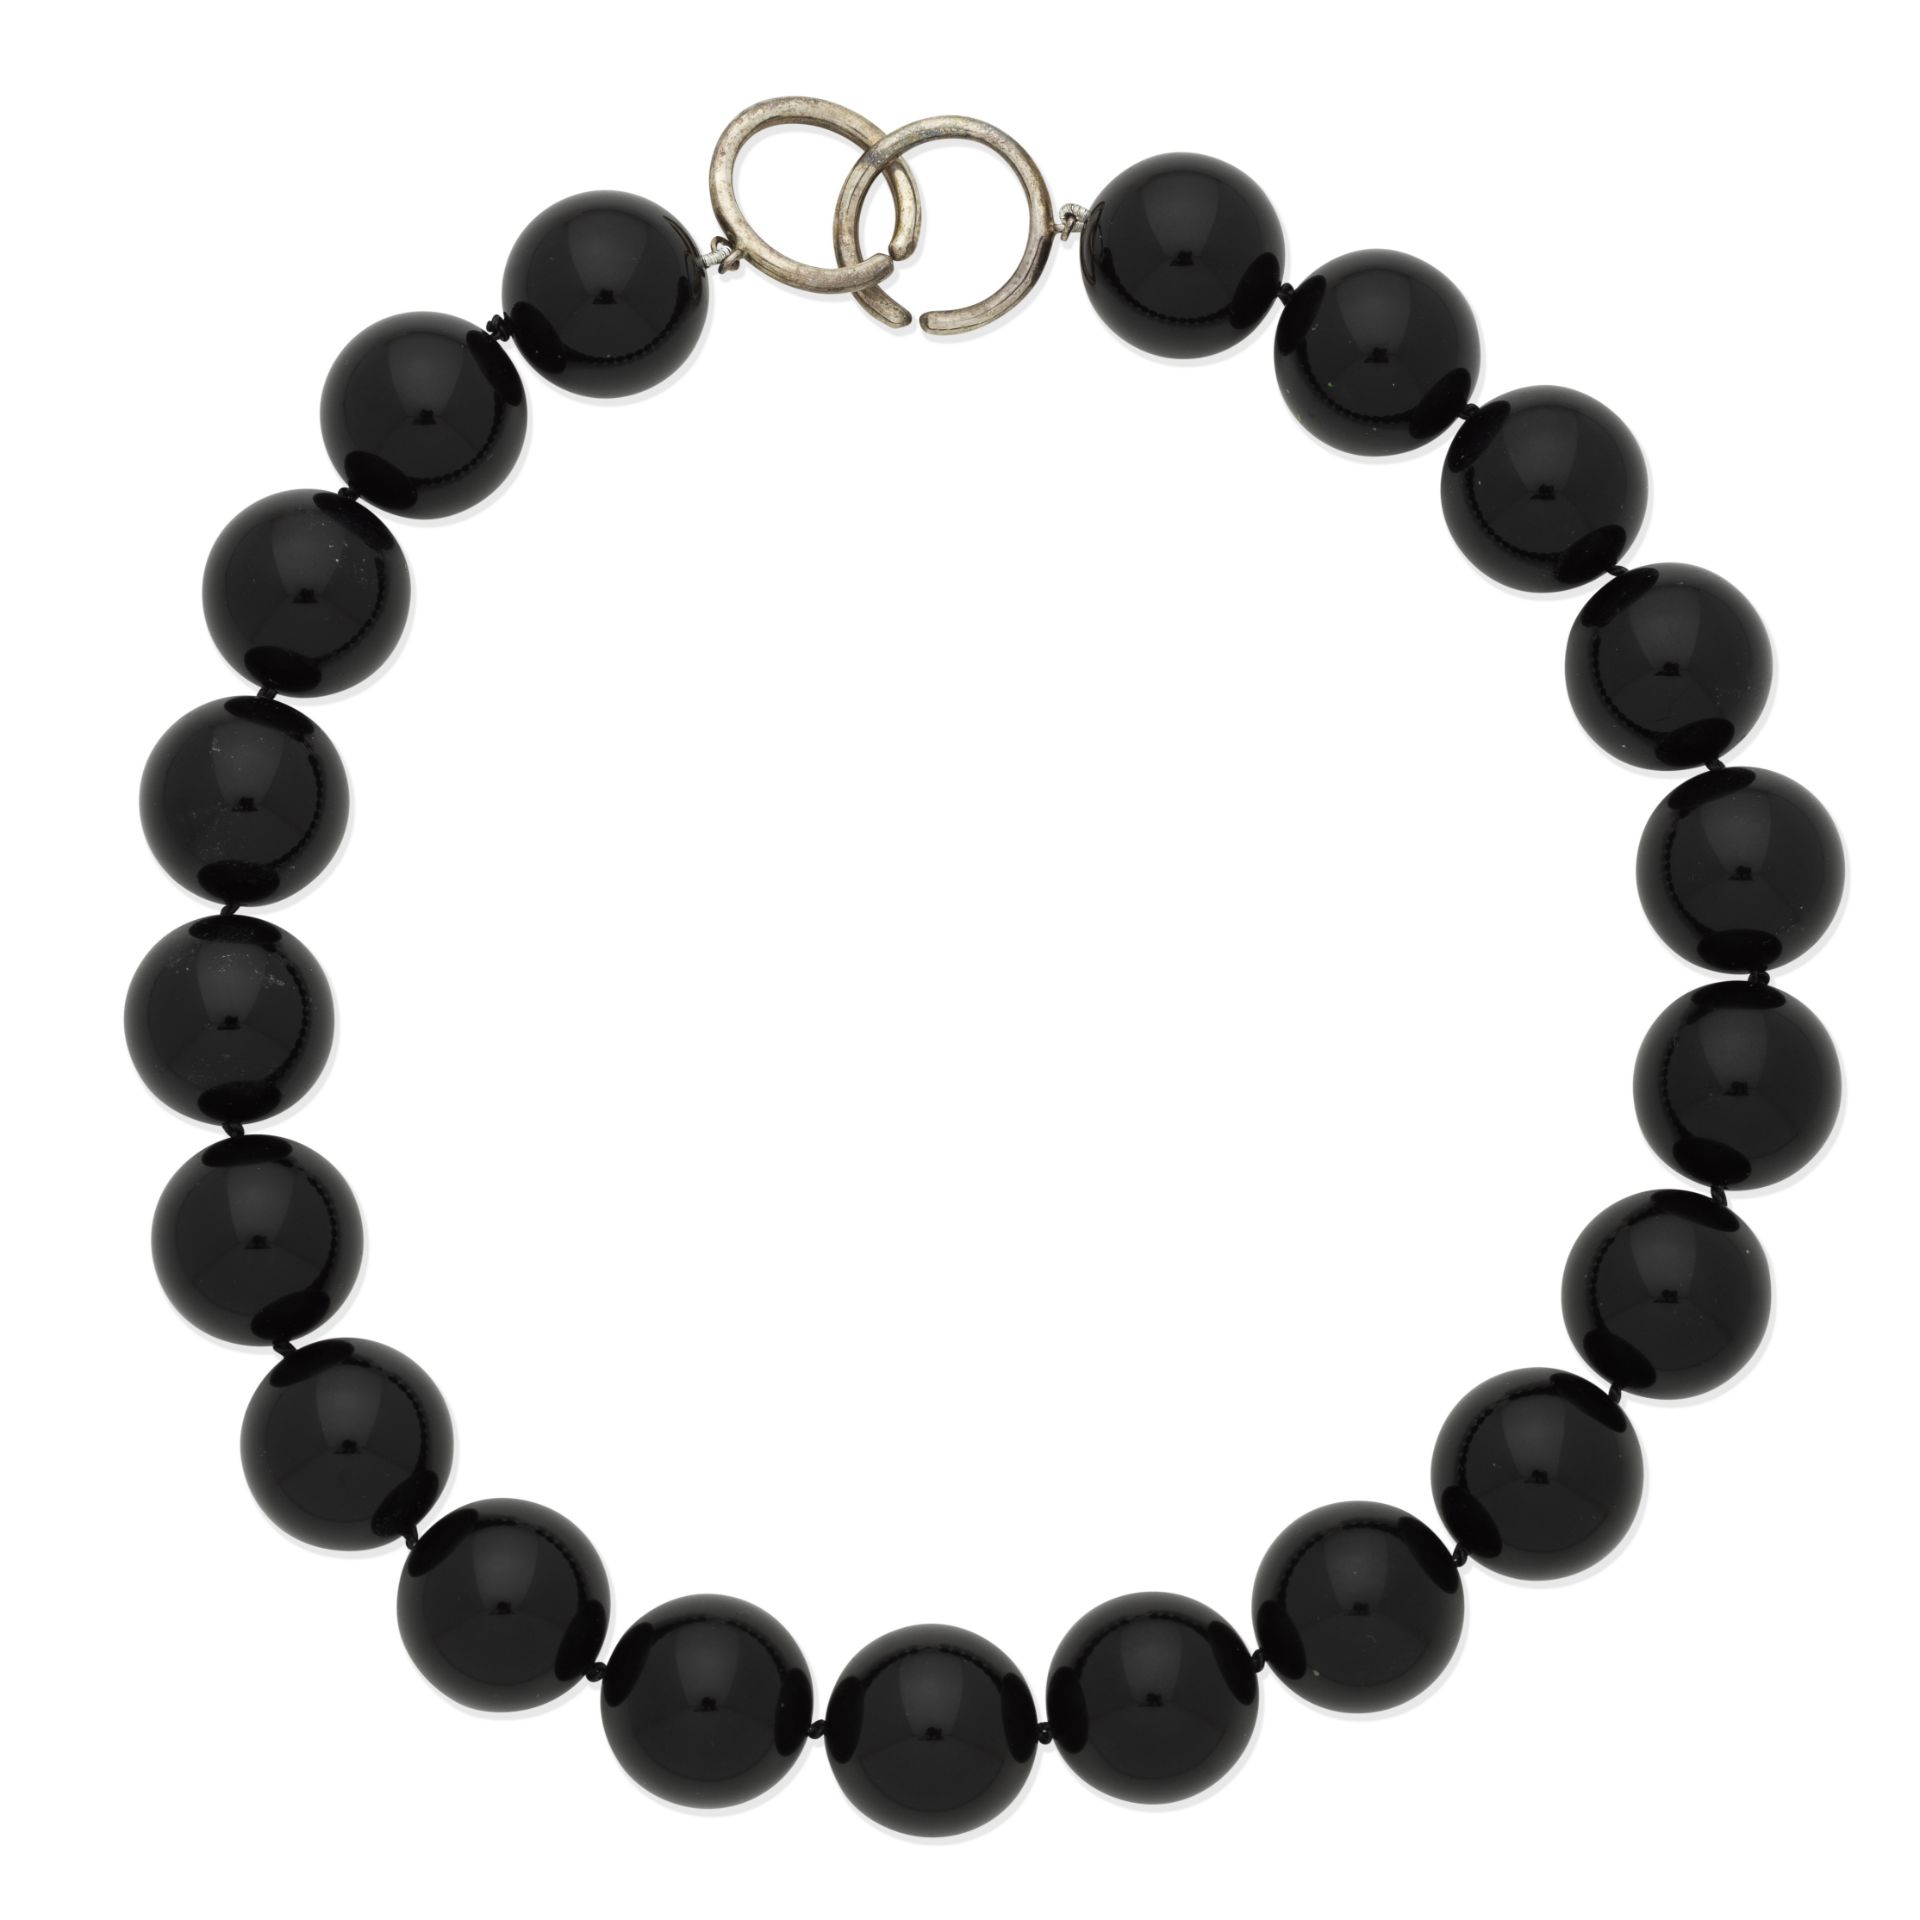 PALOMA PICASSO FOR TIFFANY: ONYX BEAD NECKLACE